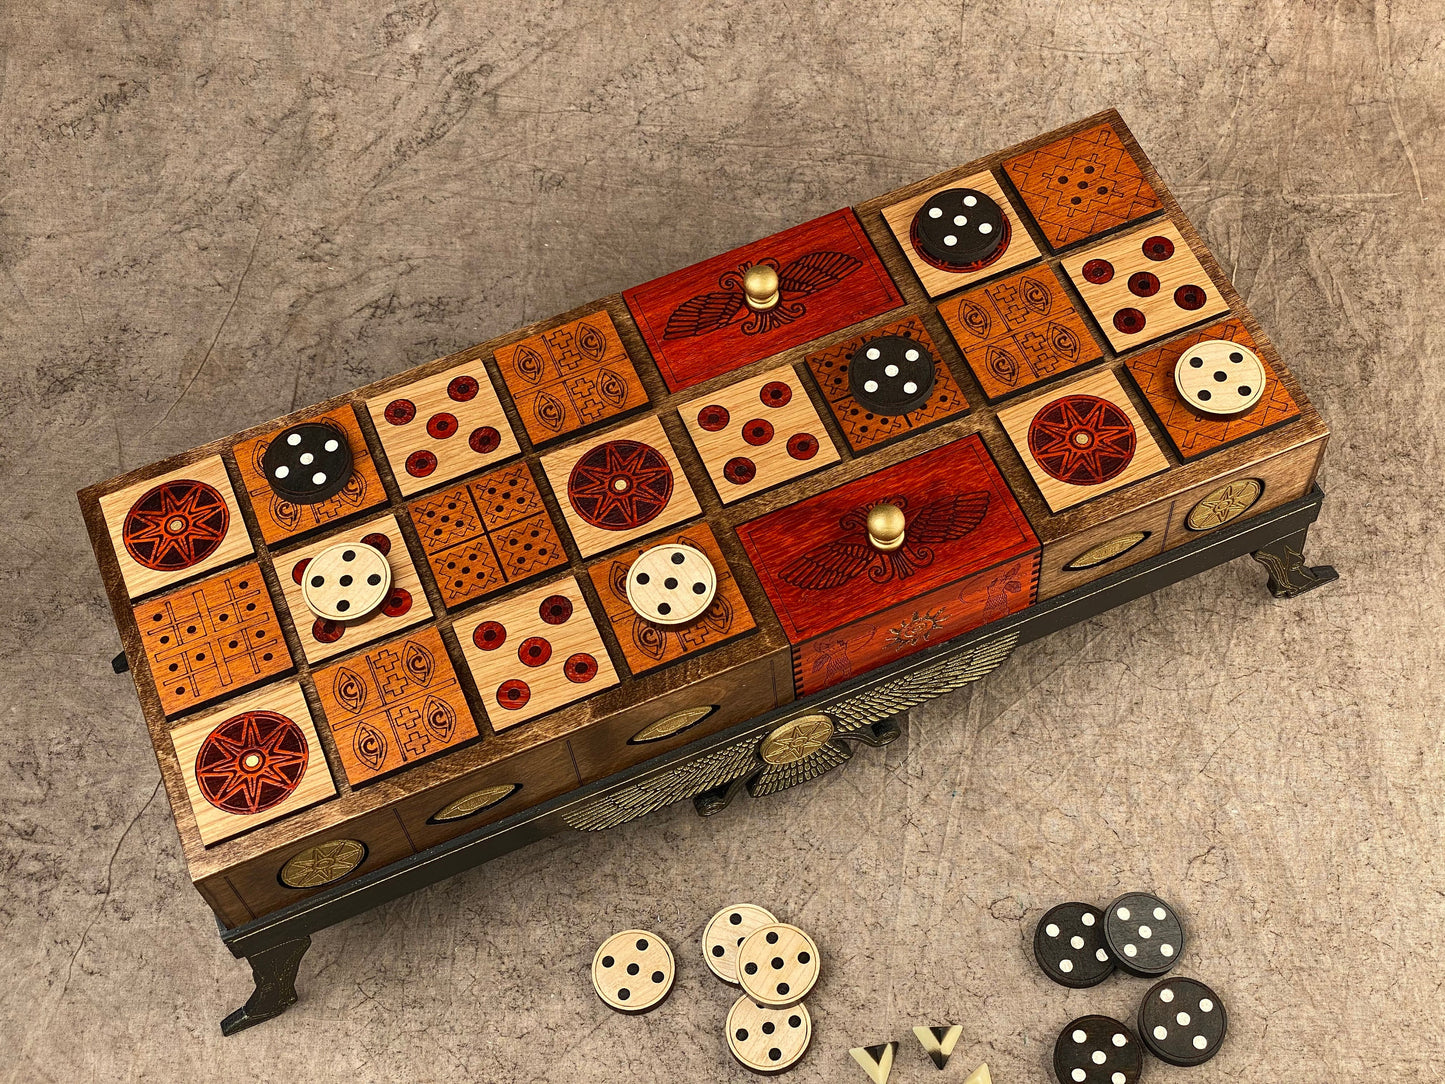 The KING'S Royal Game of UR. Ancient Sumerian Game of the King's Court! Deluxe Limited Edition.